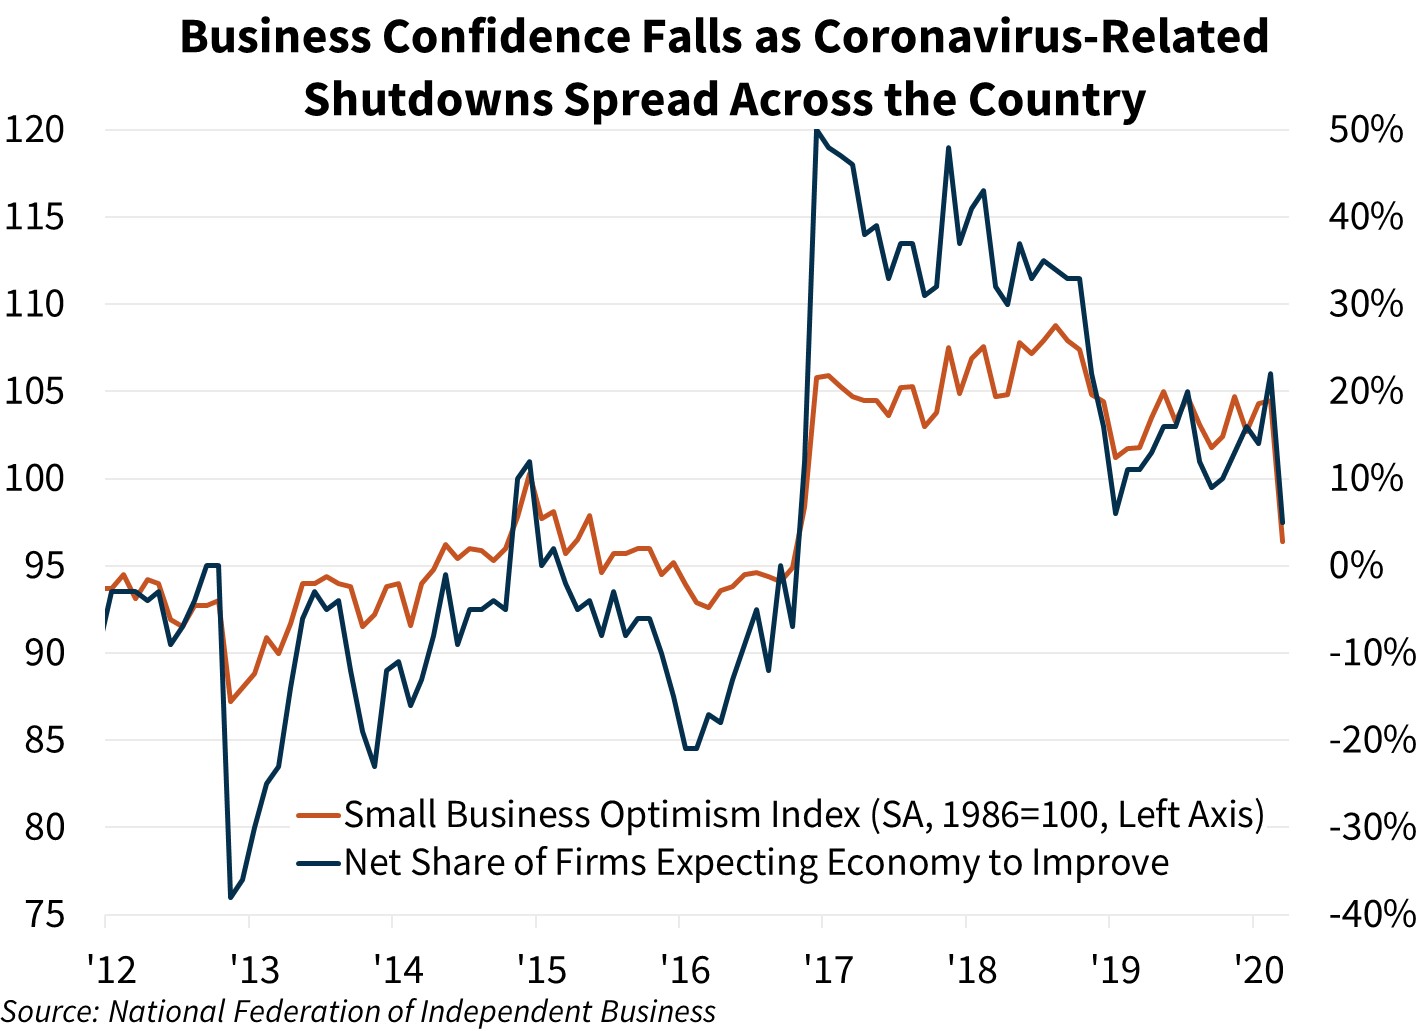  Business Confidence Falls as Coronavirus-Related Shutdowns Spread Across the Country 